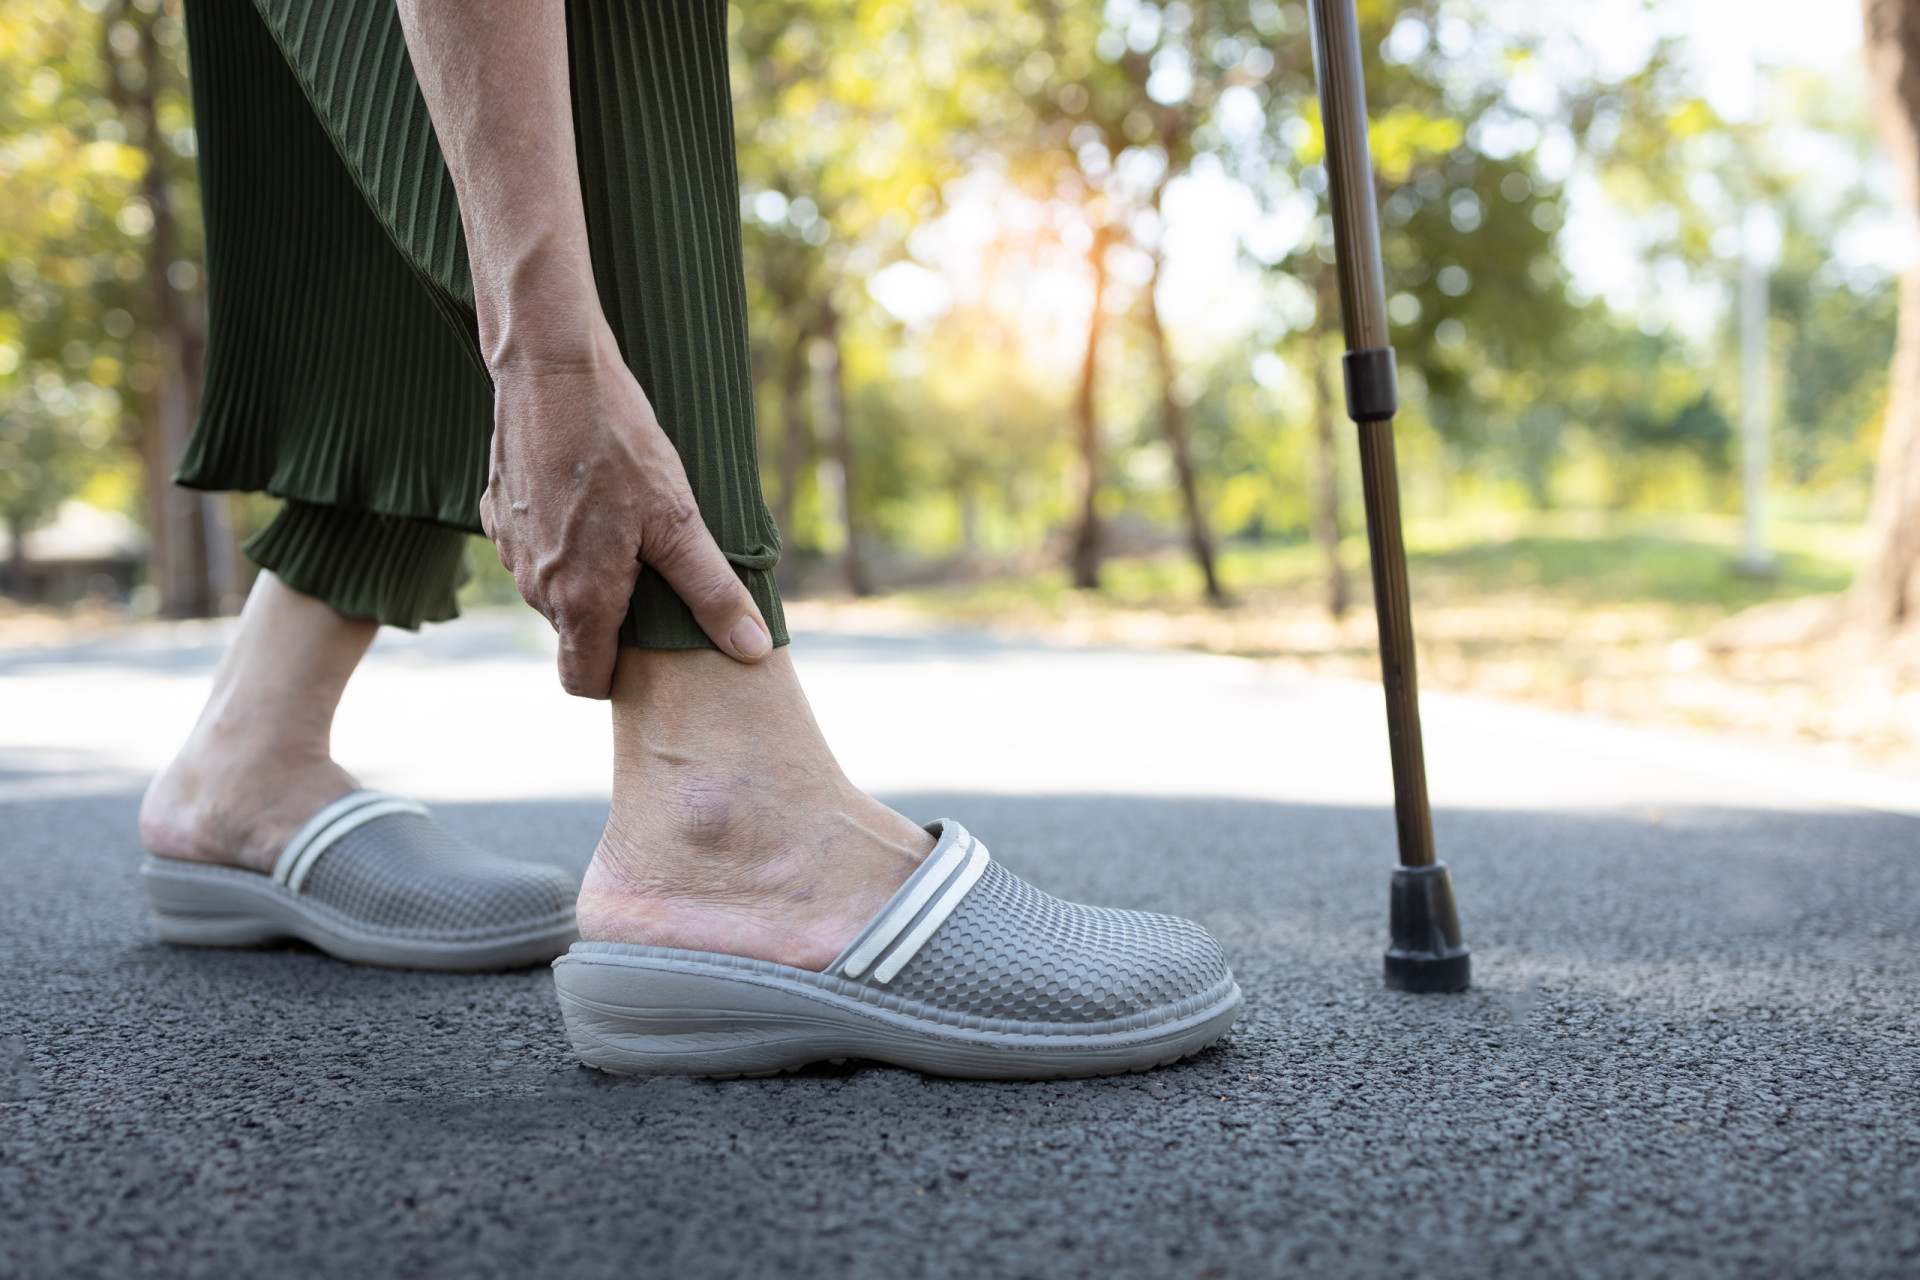 <p>Being older than 60 increases the risk of DVT. But it can occur at any age.</p><p><a href="https://www.msn.com/en-us/community/channel/vid-7xx8mnucu55yw63we9va2gwr7uihbxwc68fxqp25x6tg4ftibpra?cvid=94631541bc0f4f89bfd59158d696ad7e">Follow us and access great exclusive content every day</a></p>